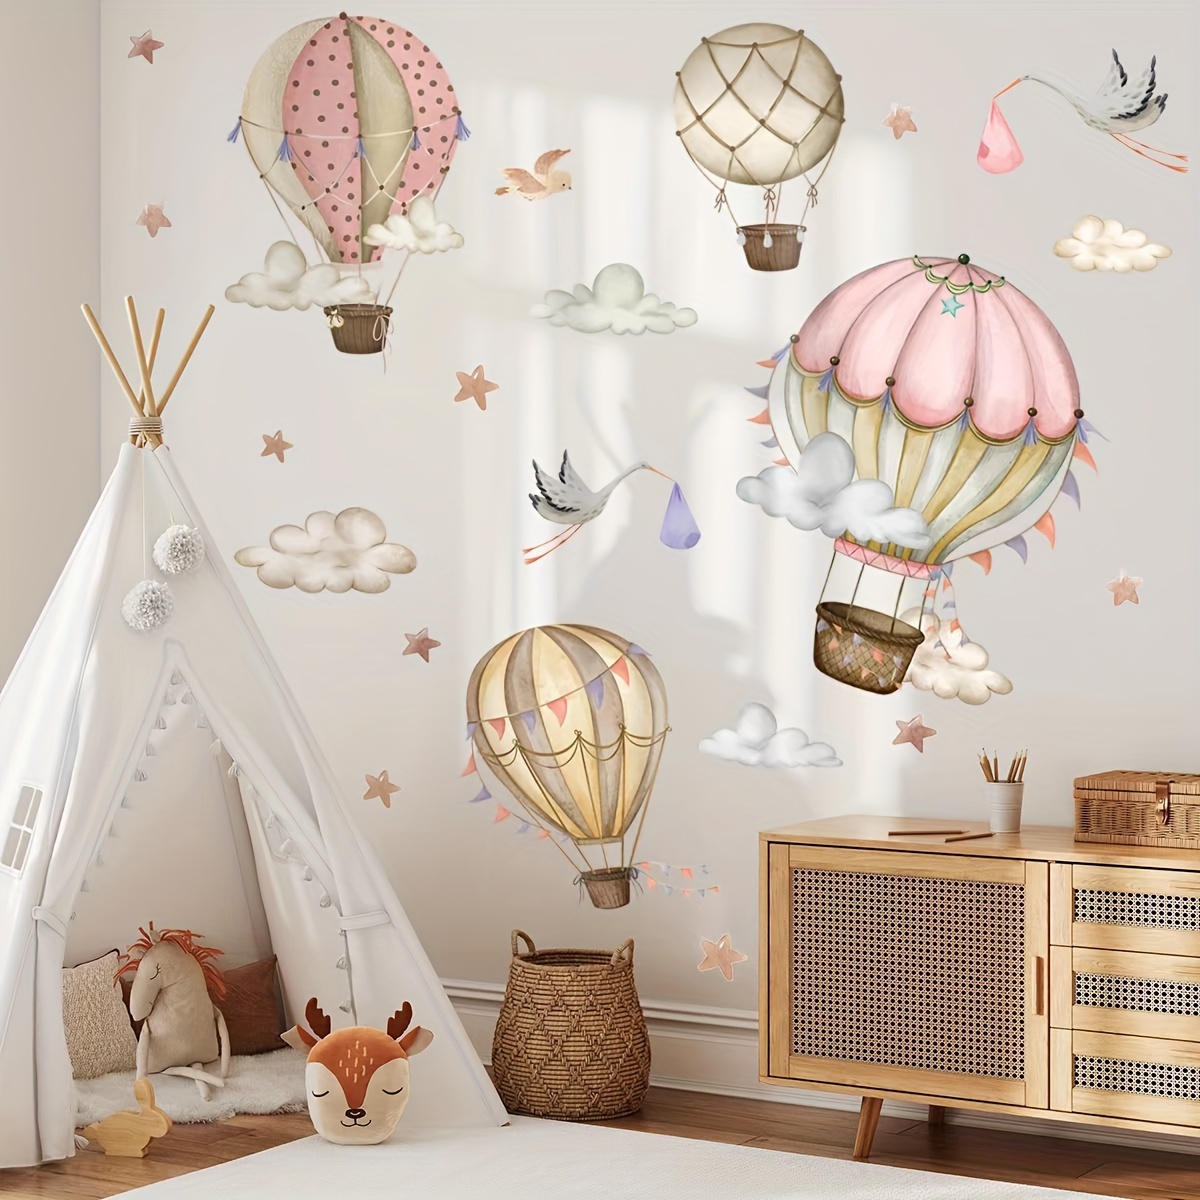 

2pcs Cartoon Hot Air Balloon Cloud Wall Decals, Living Room And Bedroom Background Wall Decor, Self-adhesive Wall Stickers